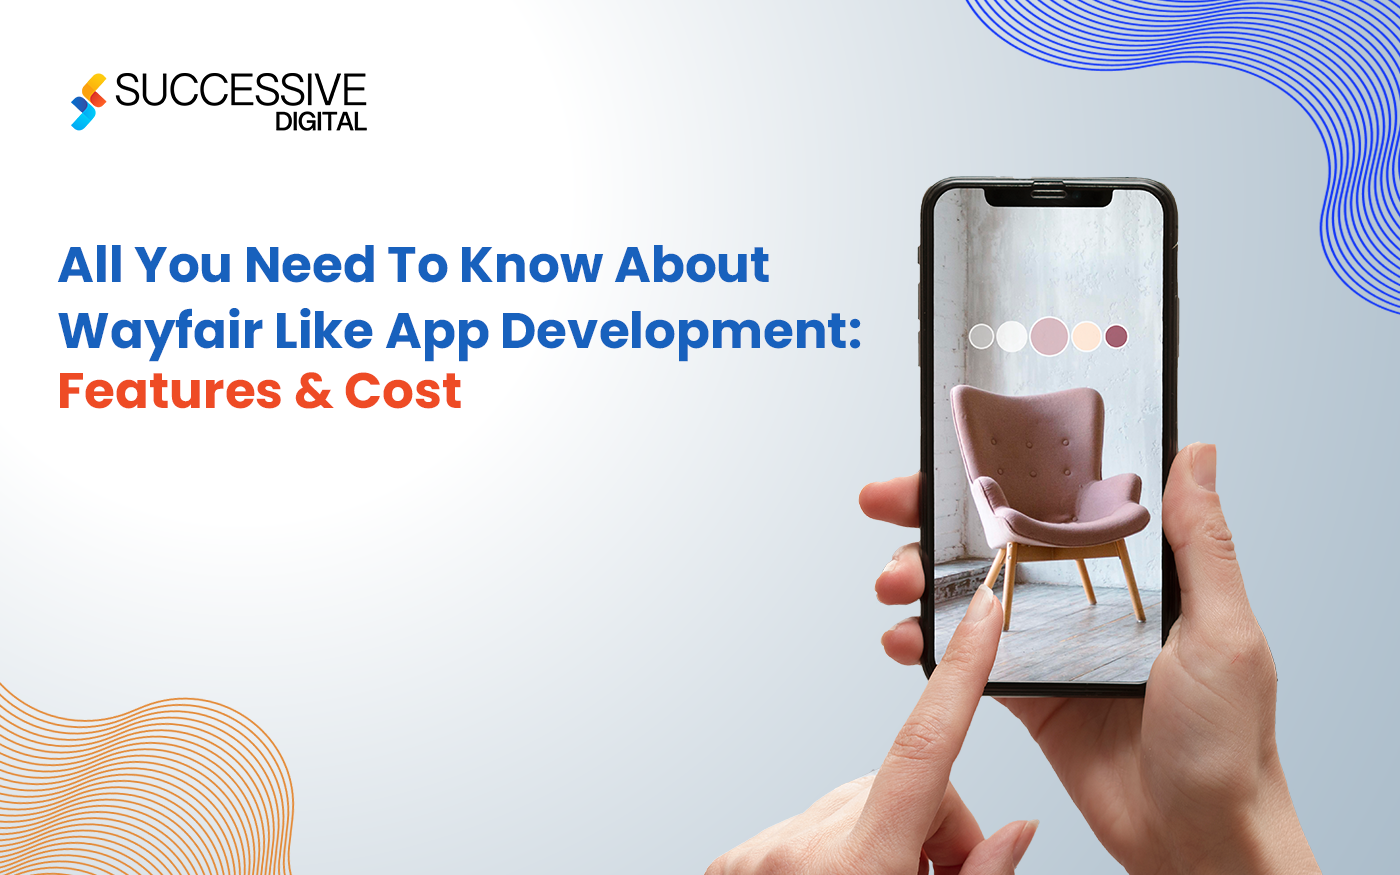 All You Need To Know About Wayfair Like App Development: Features & Cost